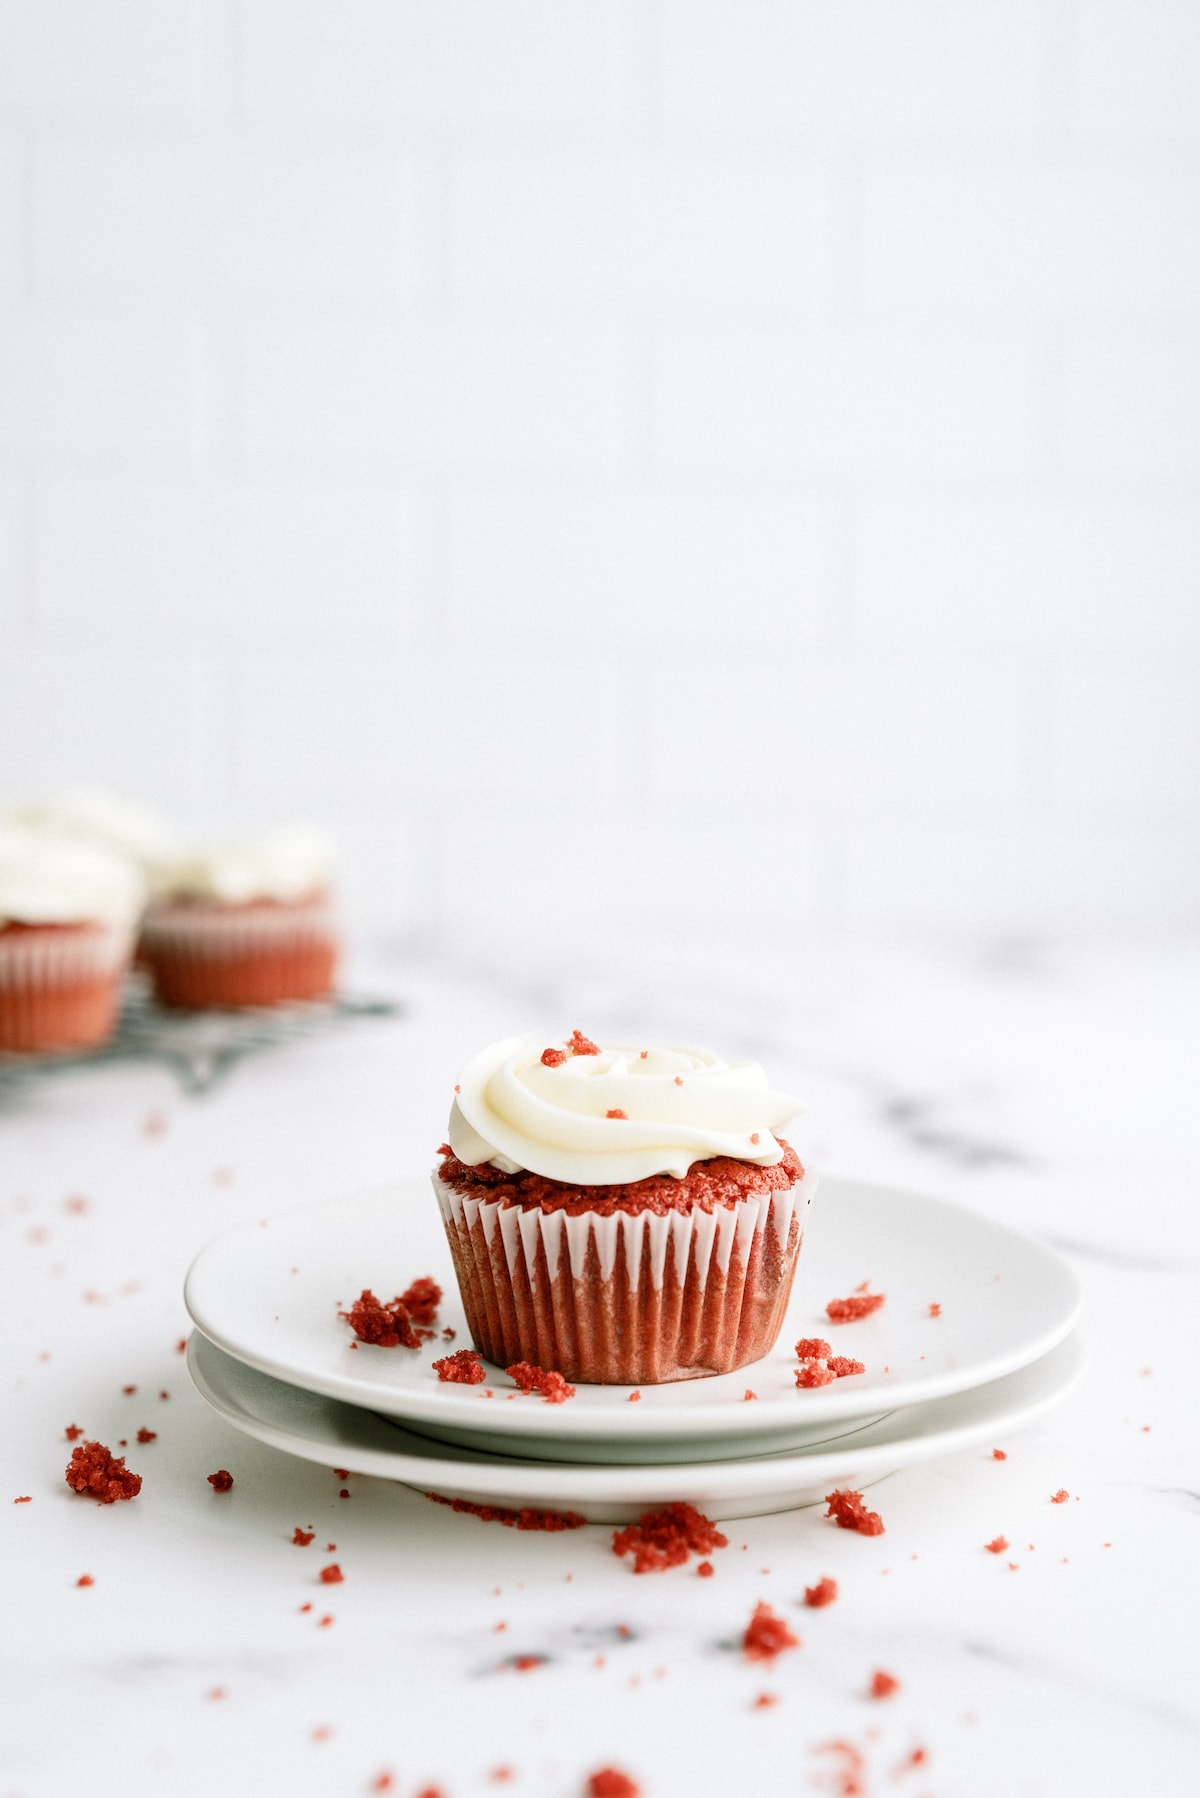 red velvet cupcake on a white plate with some cupcakes in the background